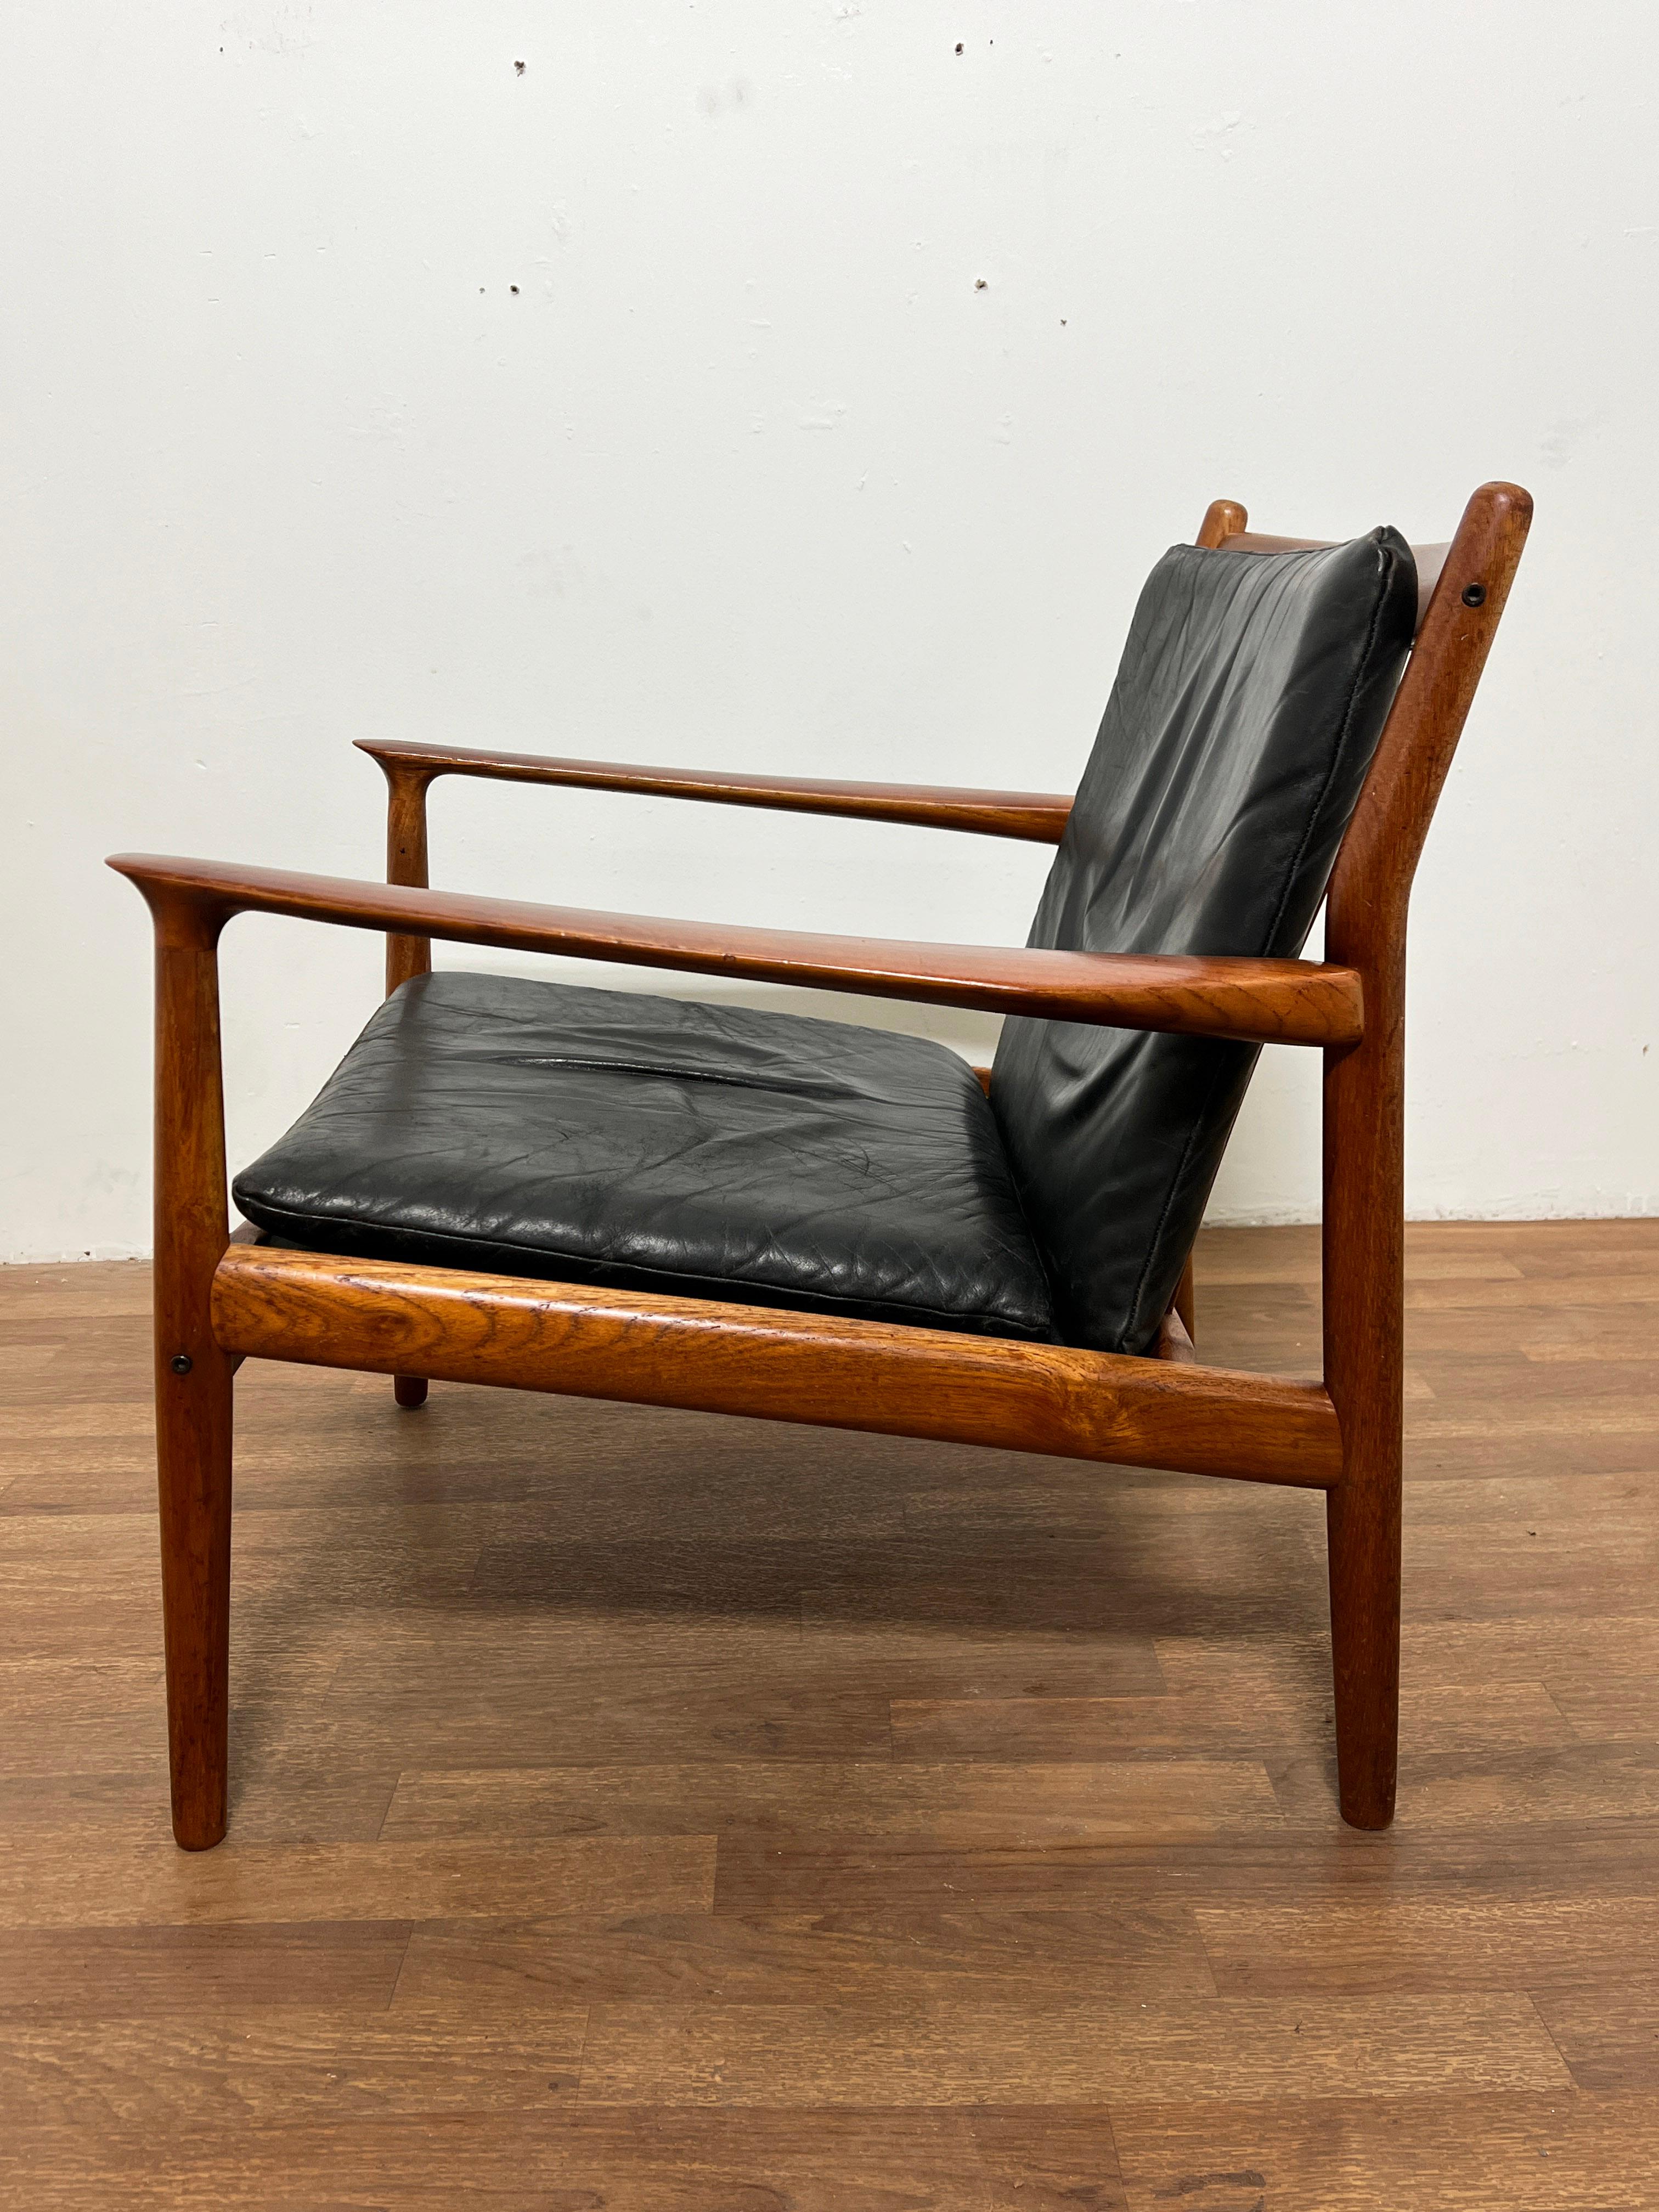 A Danish teak lounge chair in original soft leather upholstery, designed by Svend Aage Eriksen for Glostrup Mobelfabrik, in the manner of Grete Jalk who also designed for Glostrup.

A matching  three seat sofa is available in a separate listing.